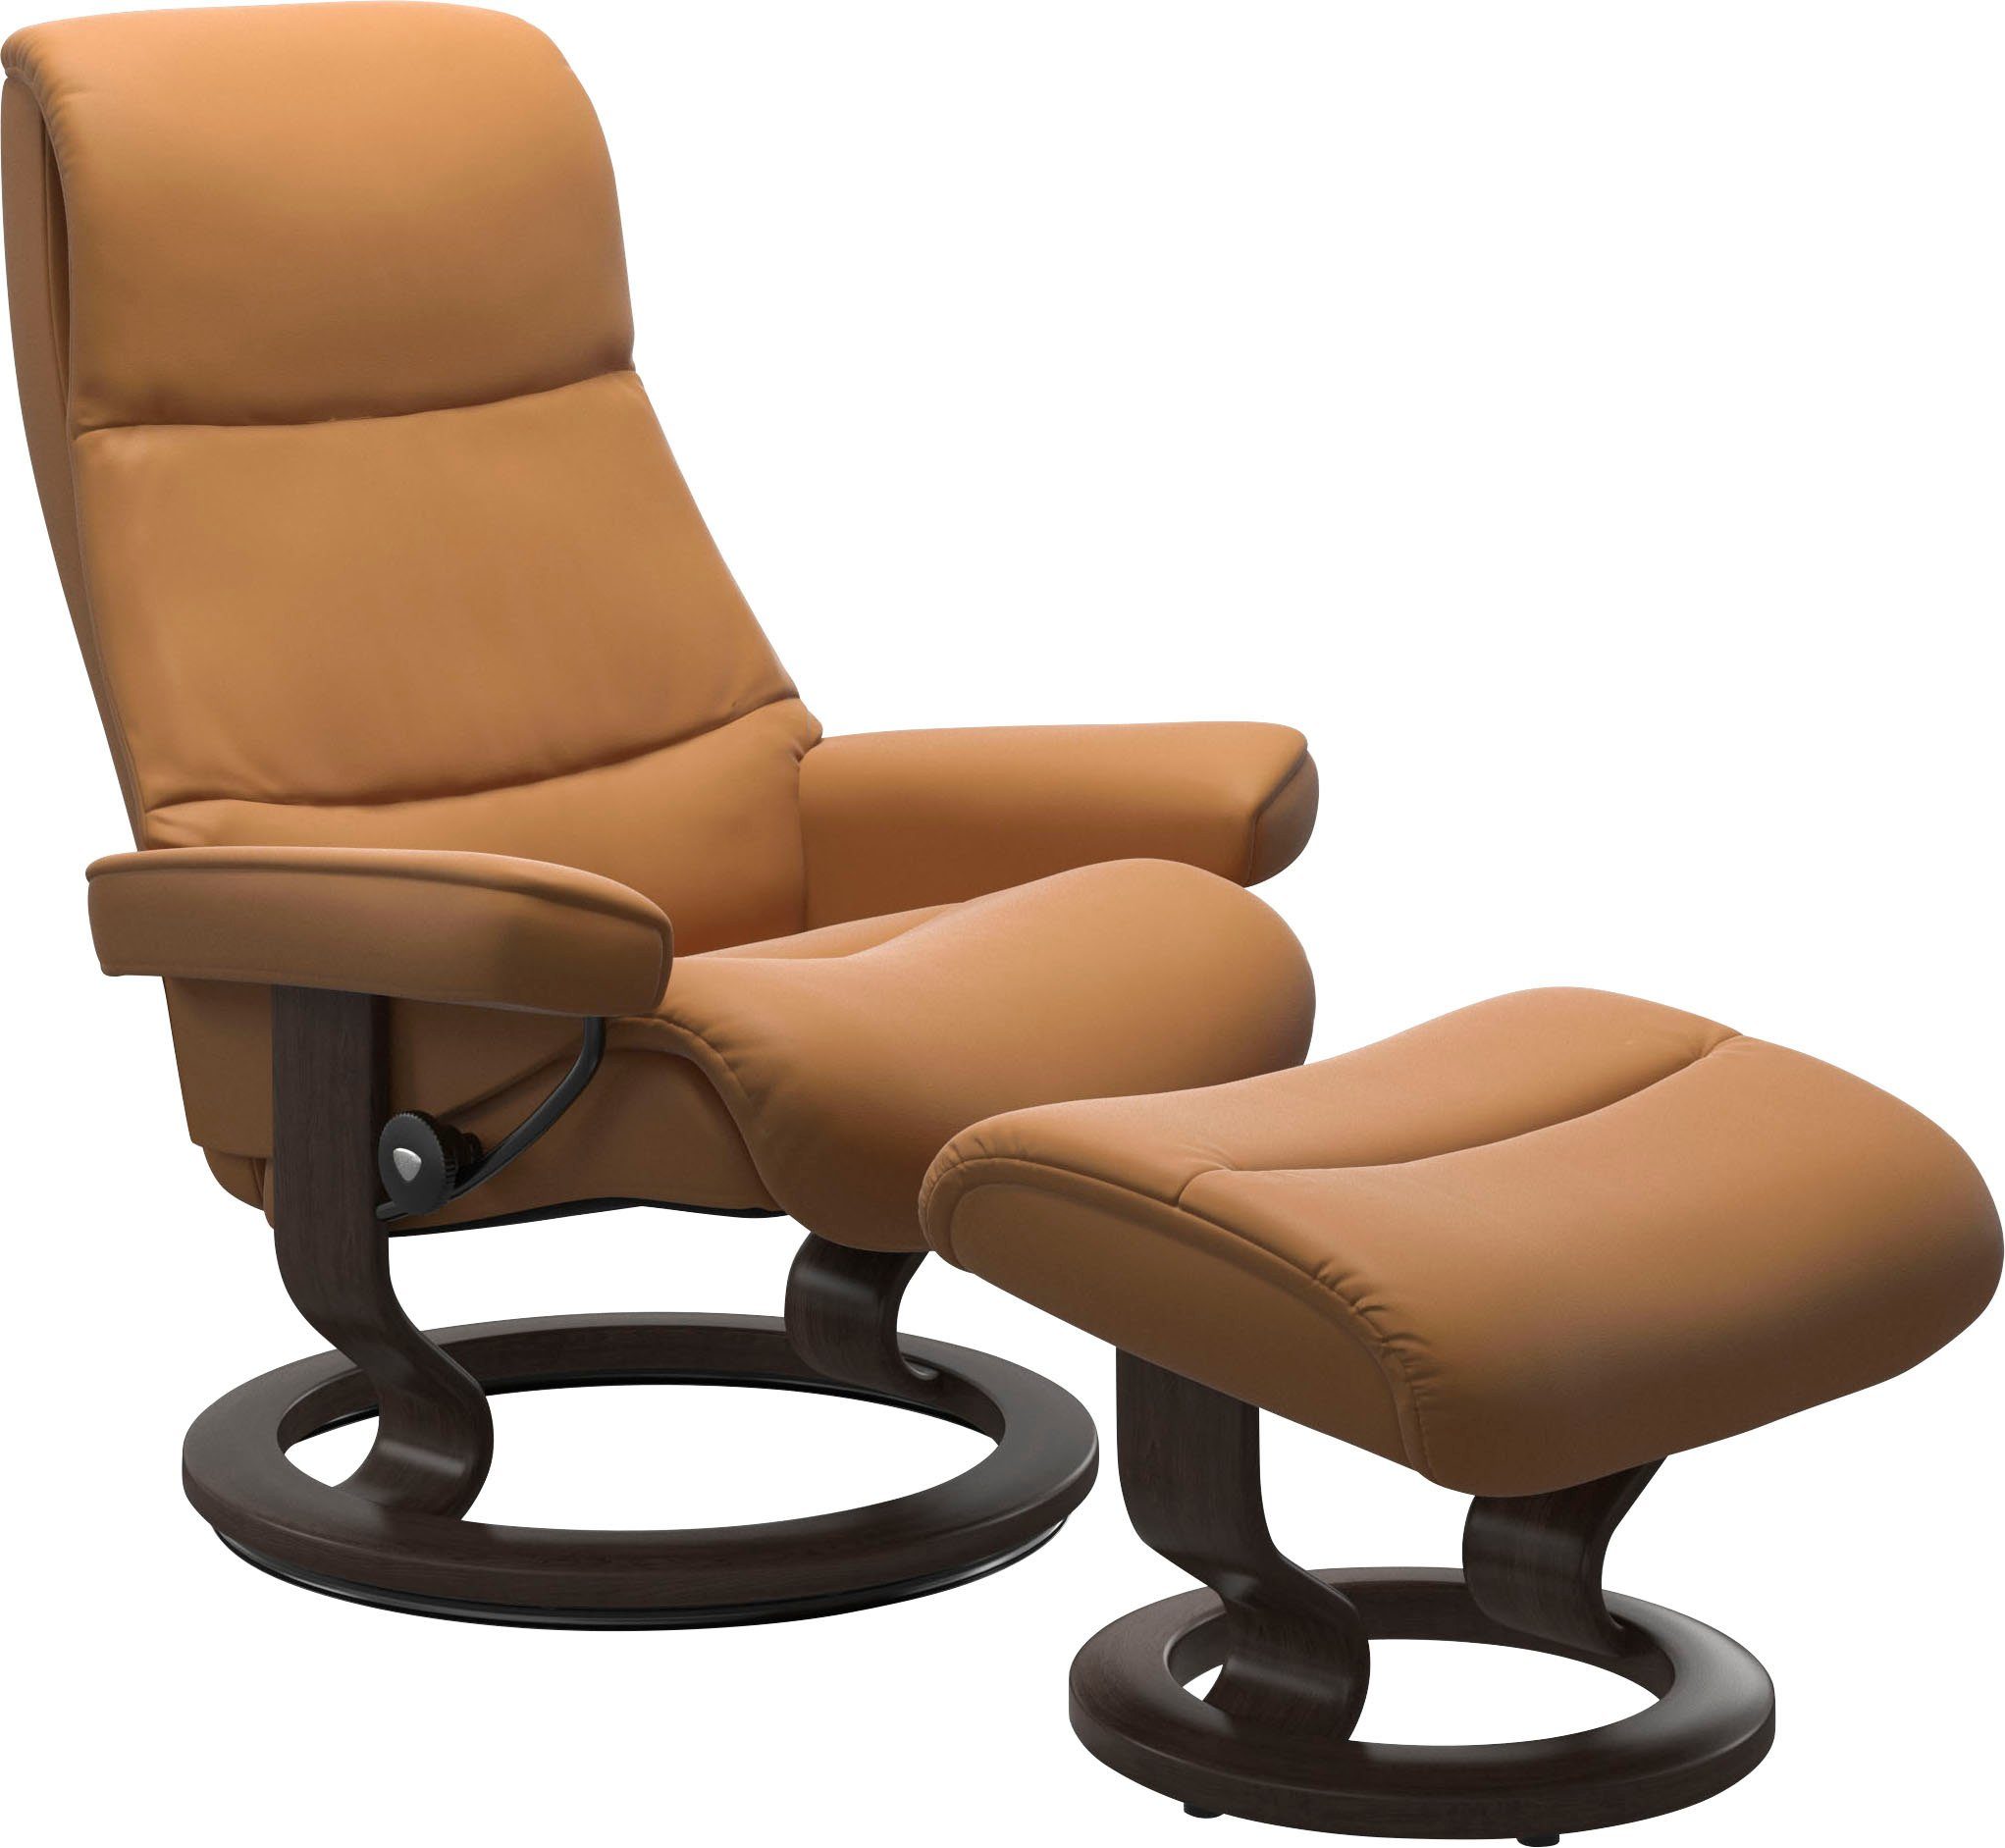 M,Gestell Größe Stressless® Wenge Base, View, Classic mit Relaxsessel